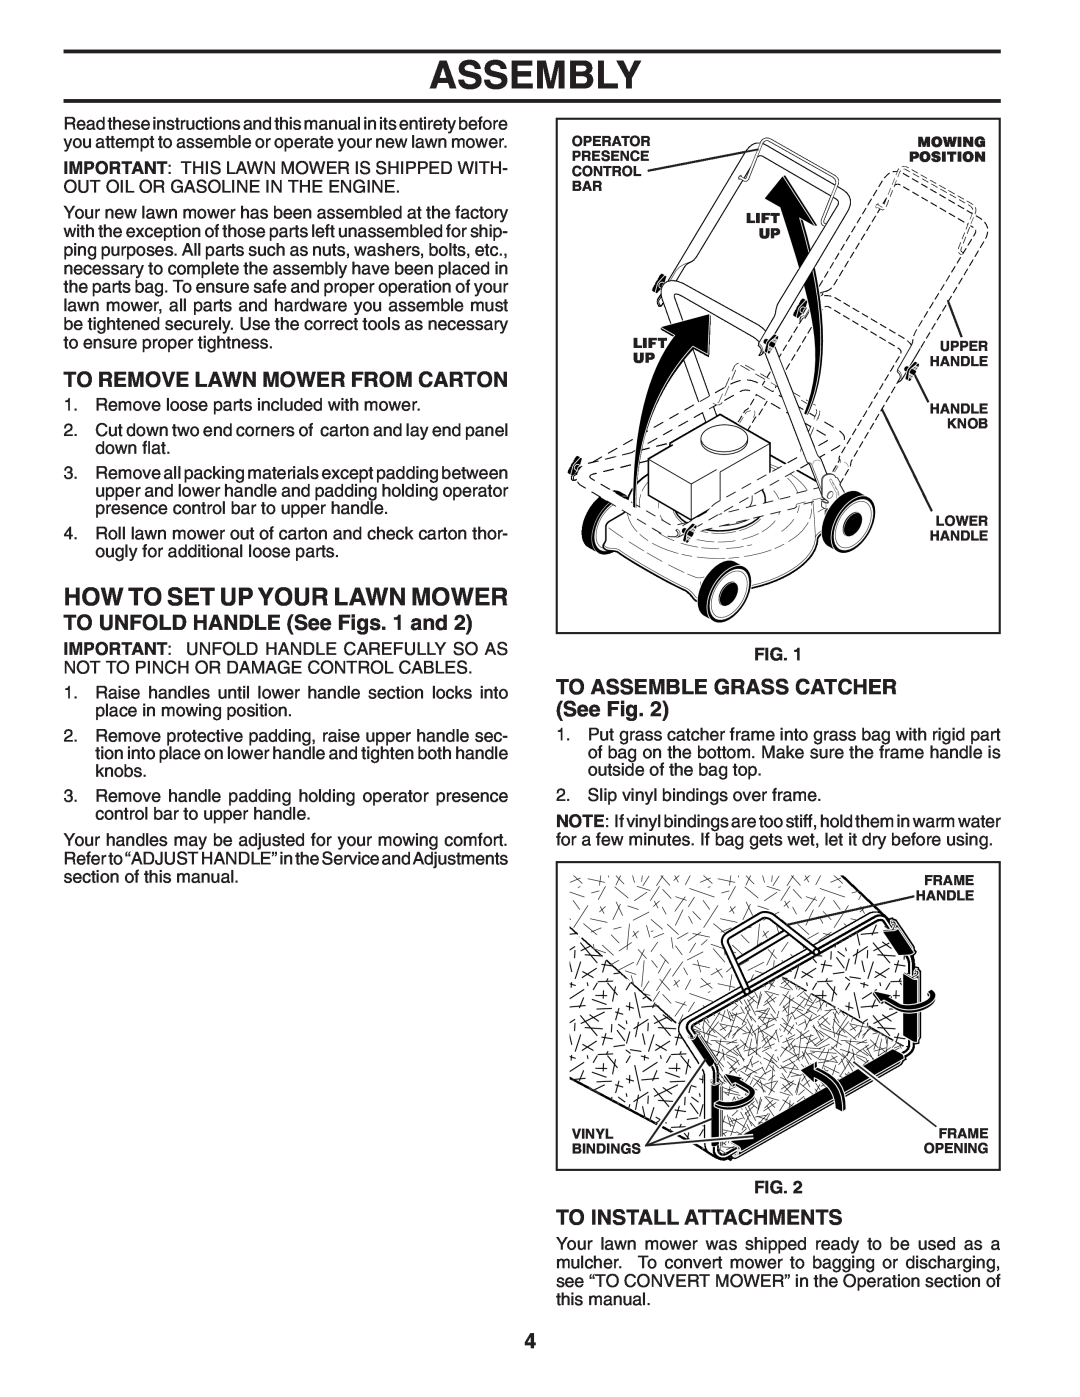 Husqvarna 7021F manual Assembly, How To Set Up Your Lawn Mower, To Remove Lawn Mower From Carton, To Install Attachments 